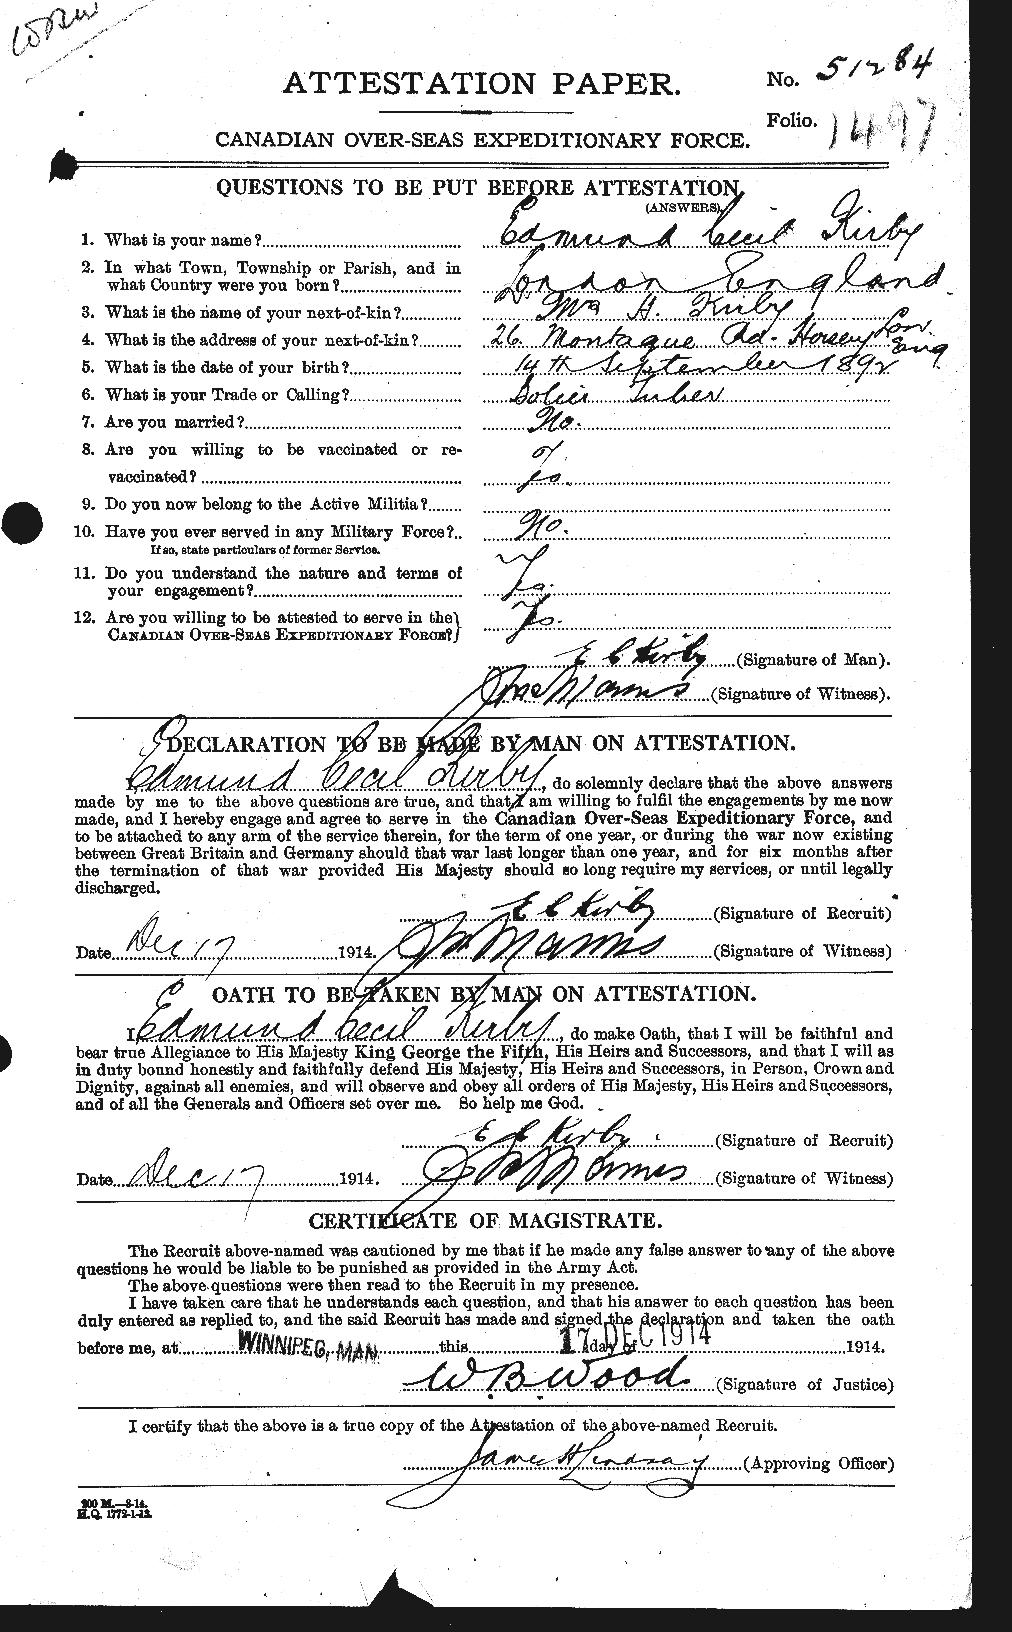 Personnel Records of the First World War - CEF 437177a